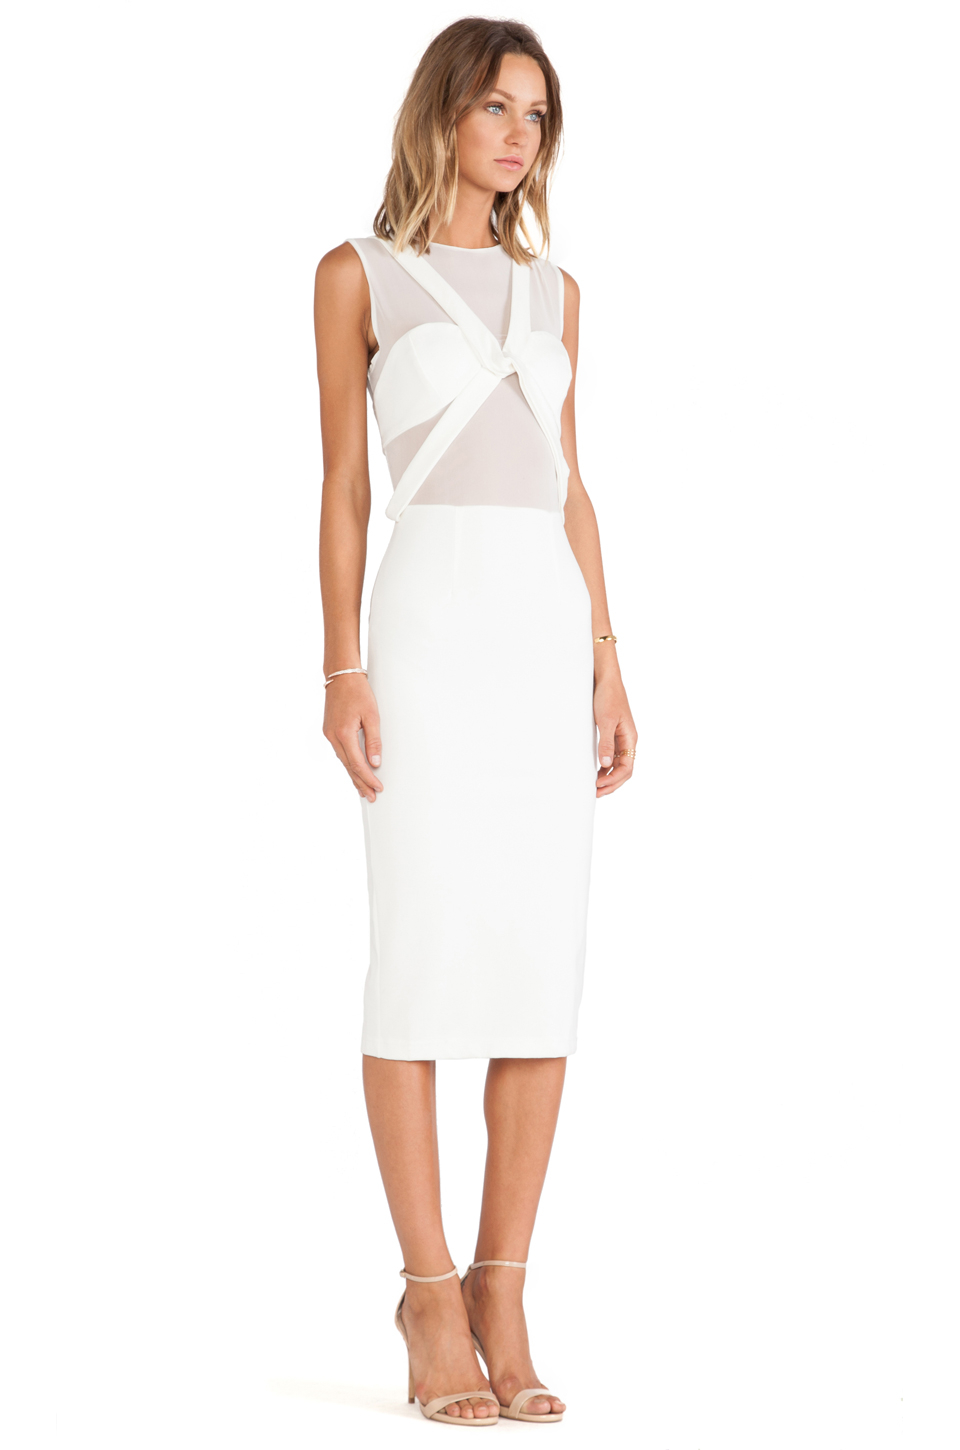 Lyst - Maurie & Eve Any Minute Midi Dress in White